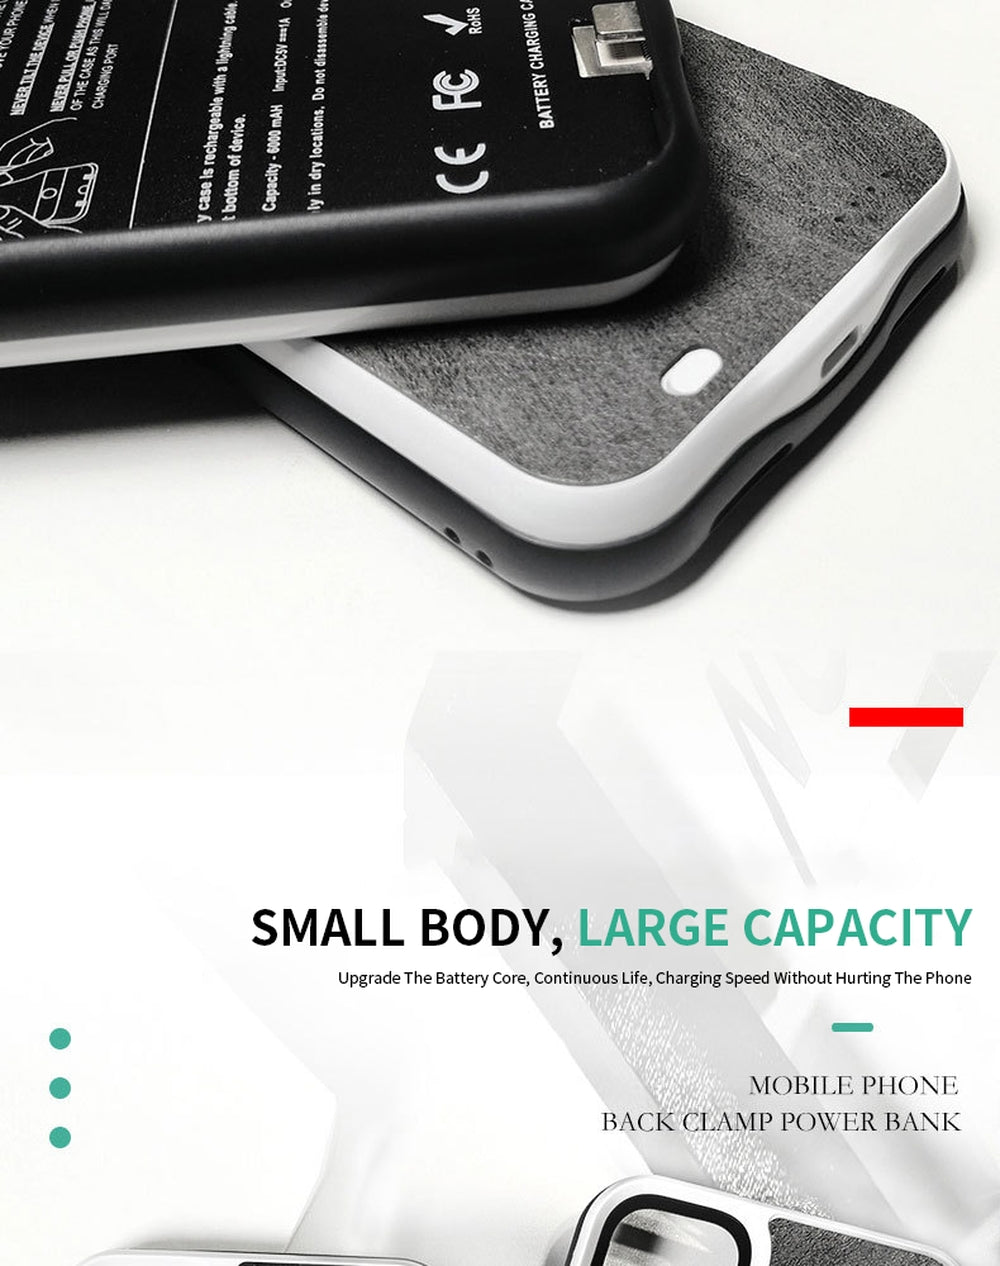 Slim Charging Case for iPhone 11